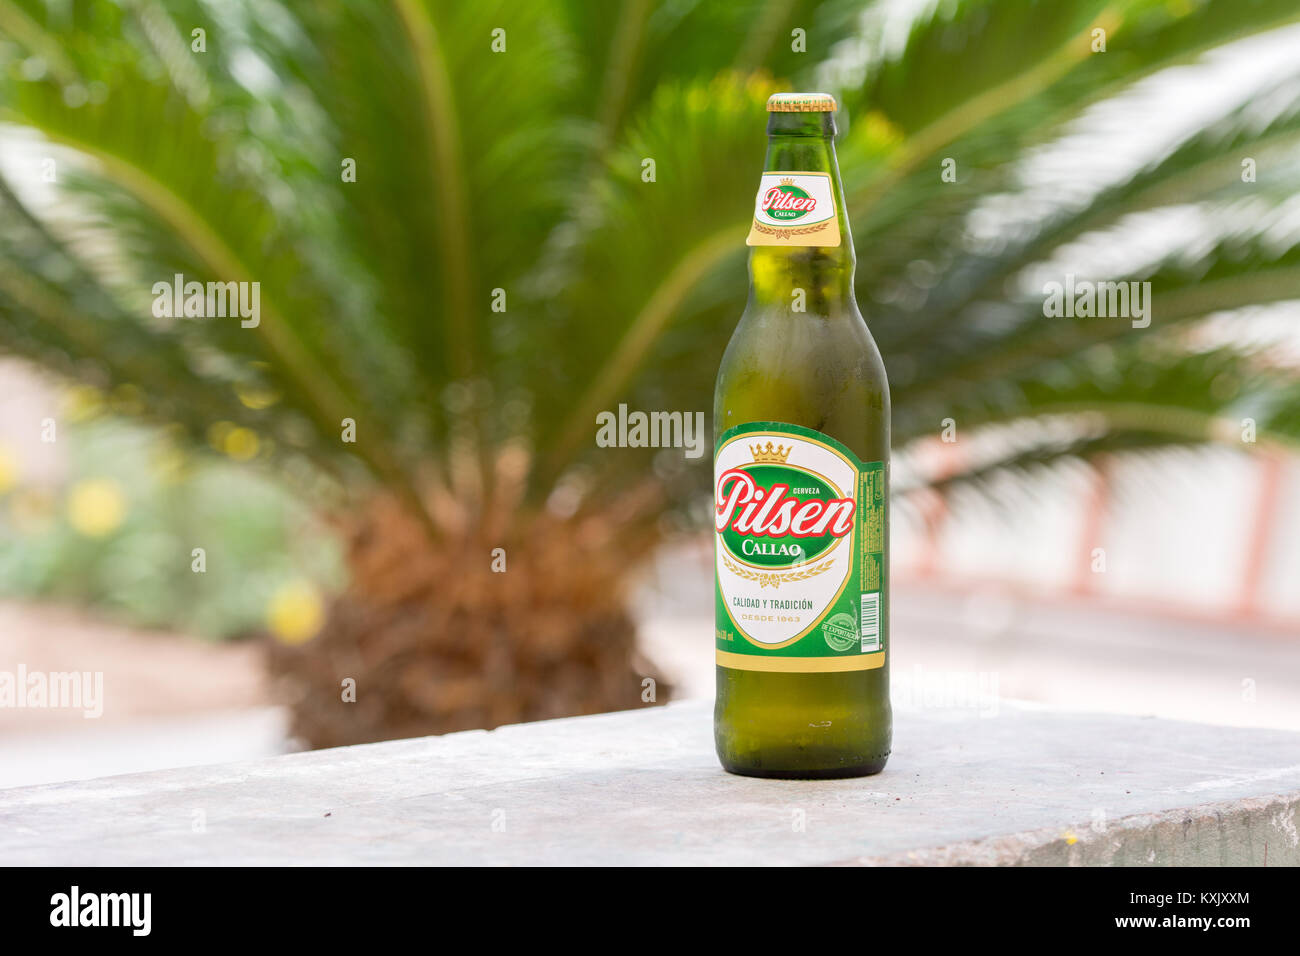 630ml bottle of Pilsen Callao lager - one of the most popular beers in Peru Stock Photo